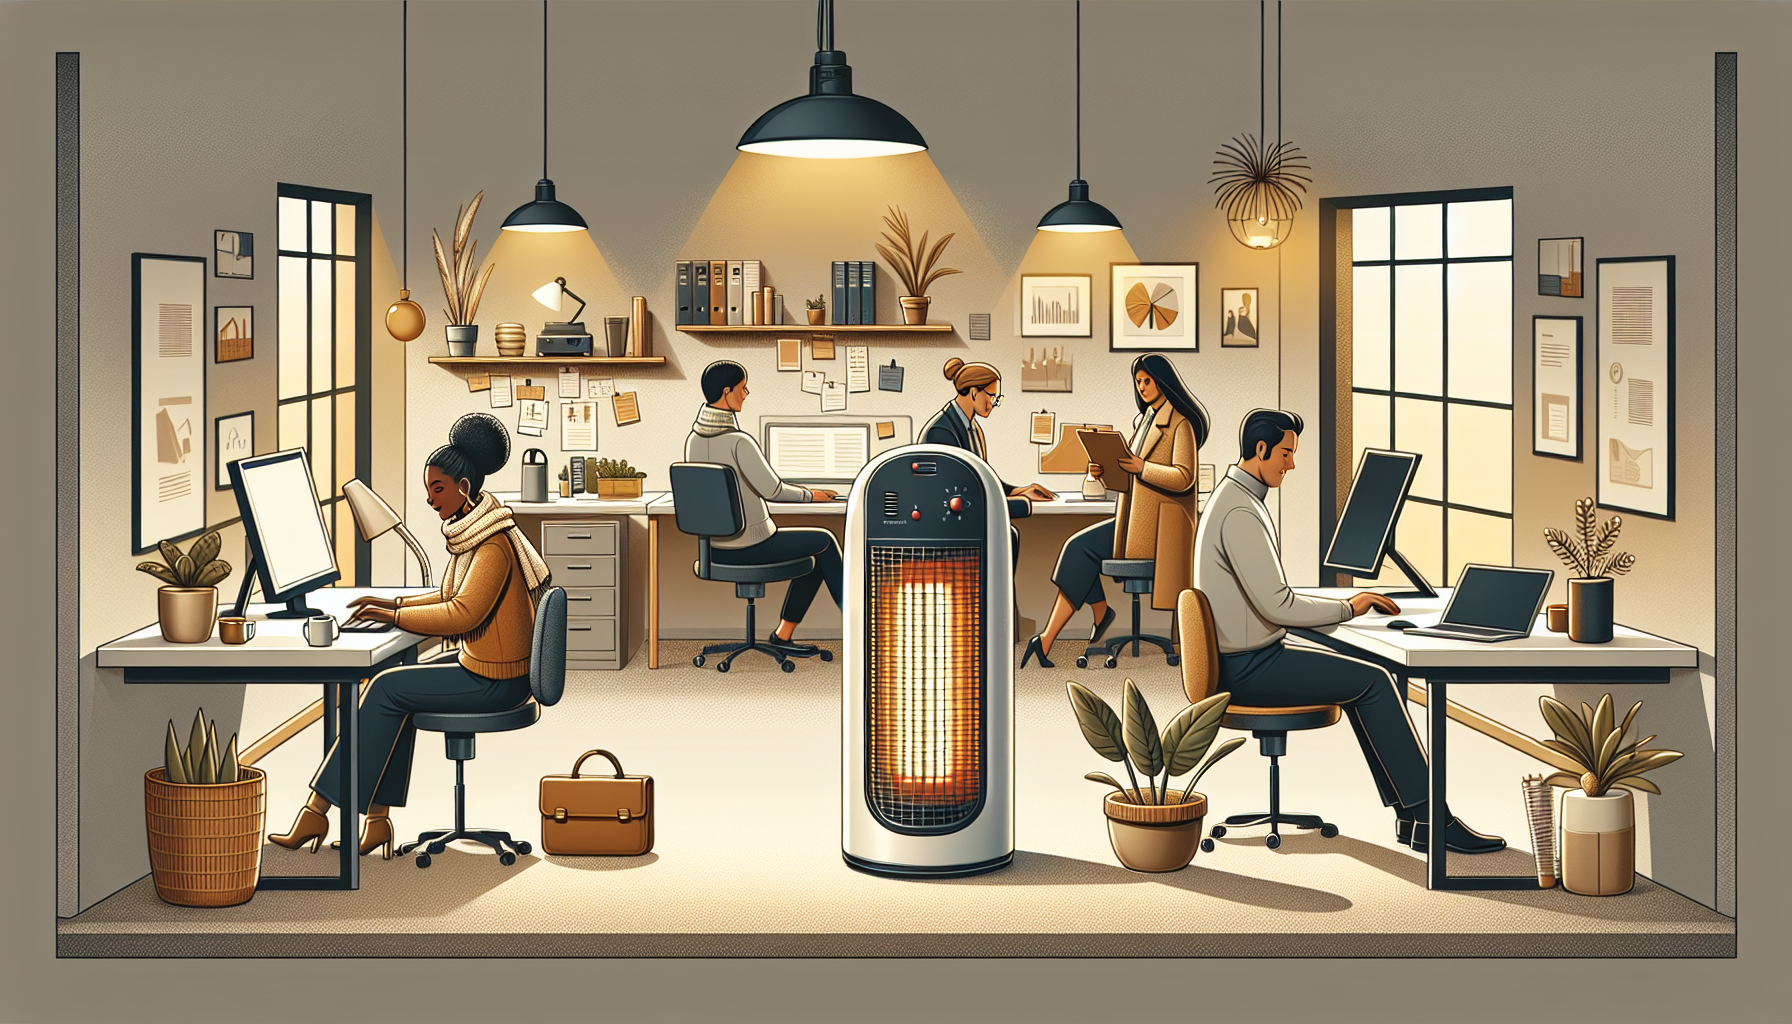 Can Space Heaters Provide Added Warmth in an Office?